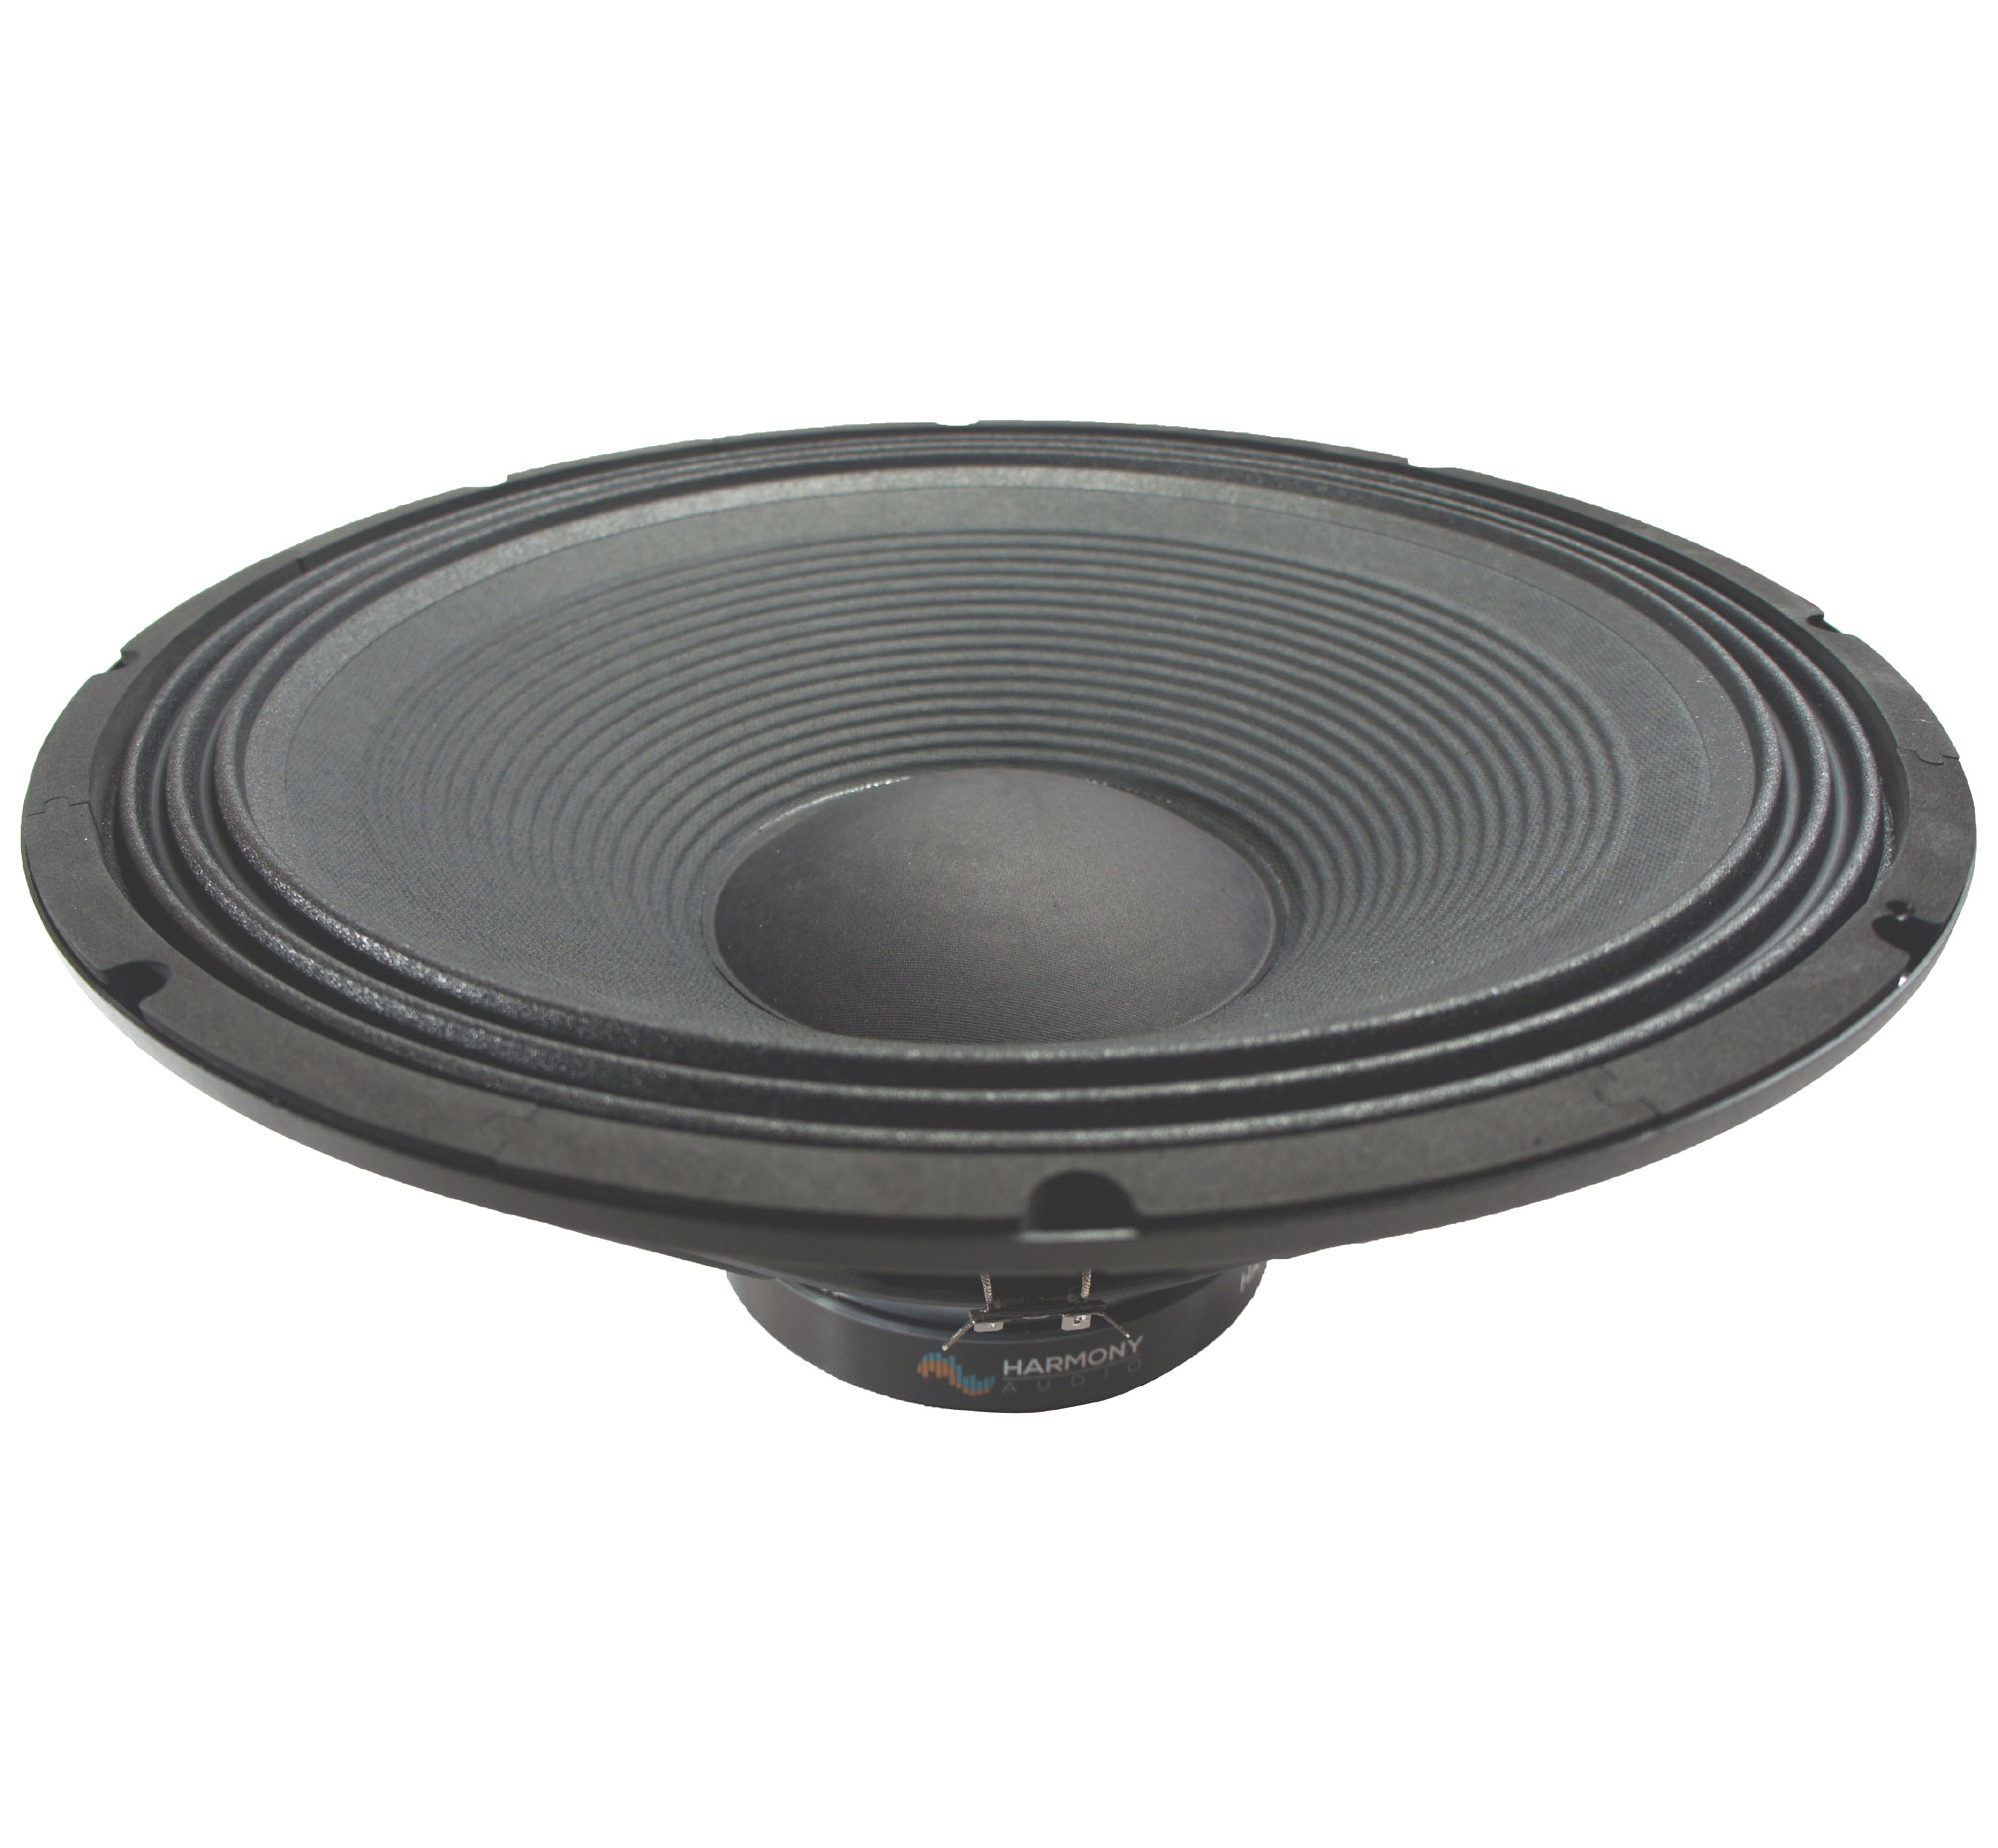 4x Harmony HA-P18"WS8 Raw Replacement 18" Pro PA 1200W Sub Speaker 8 Ohm Woofer - image 2 of 6